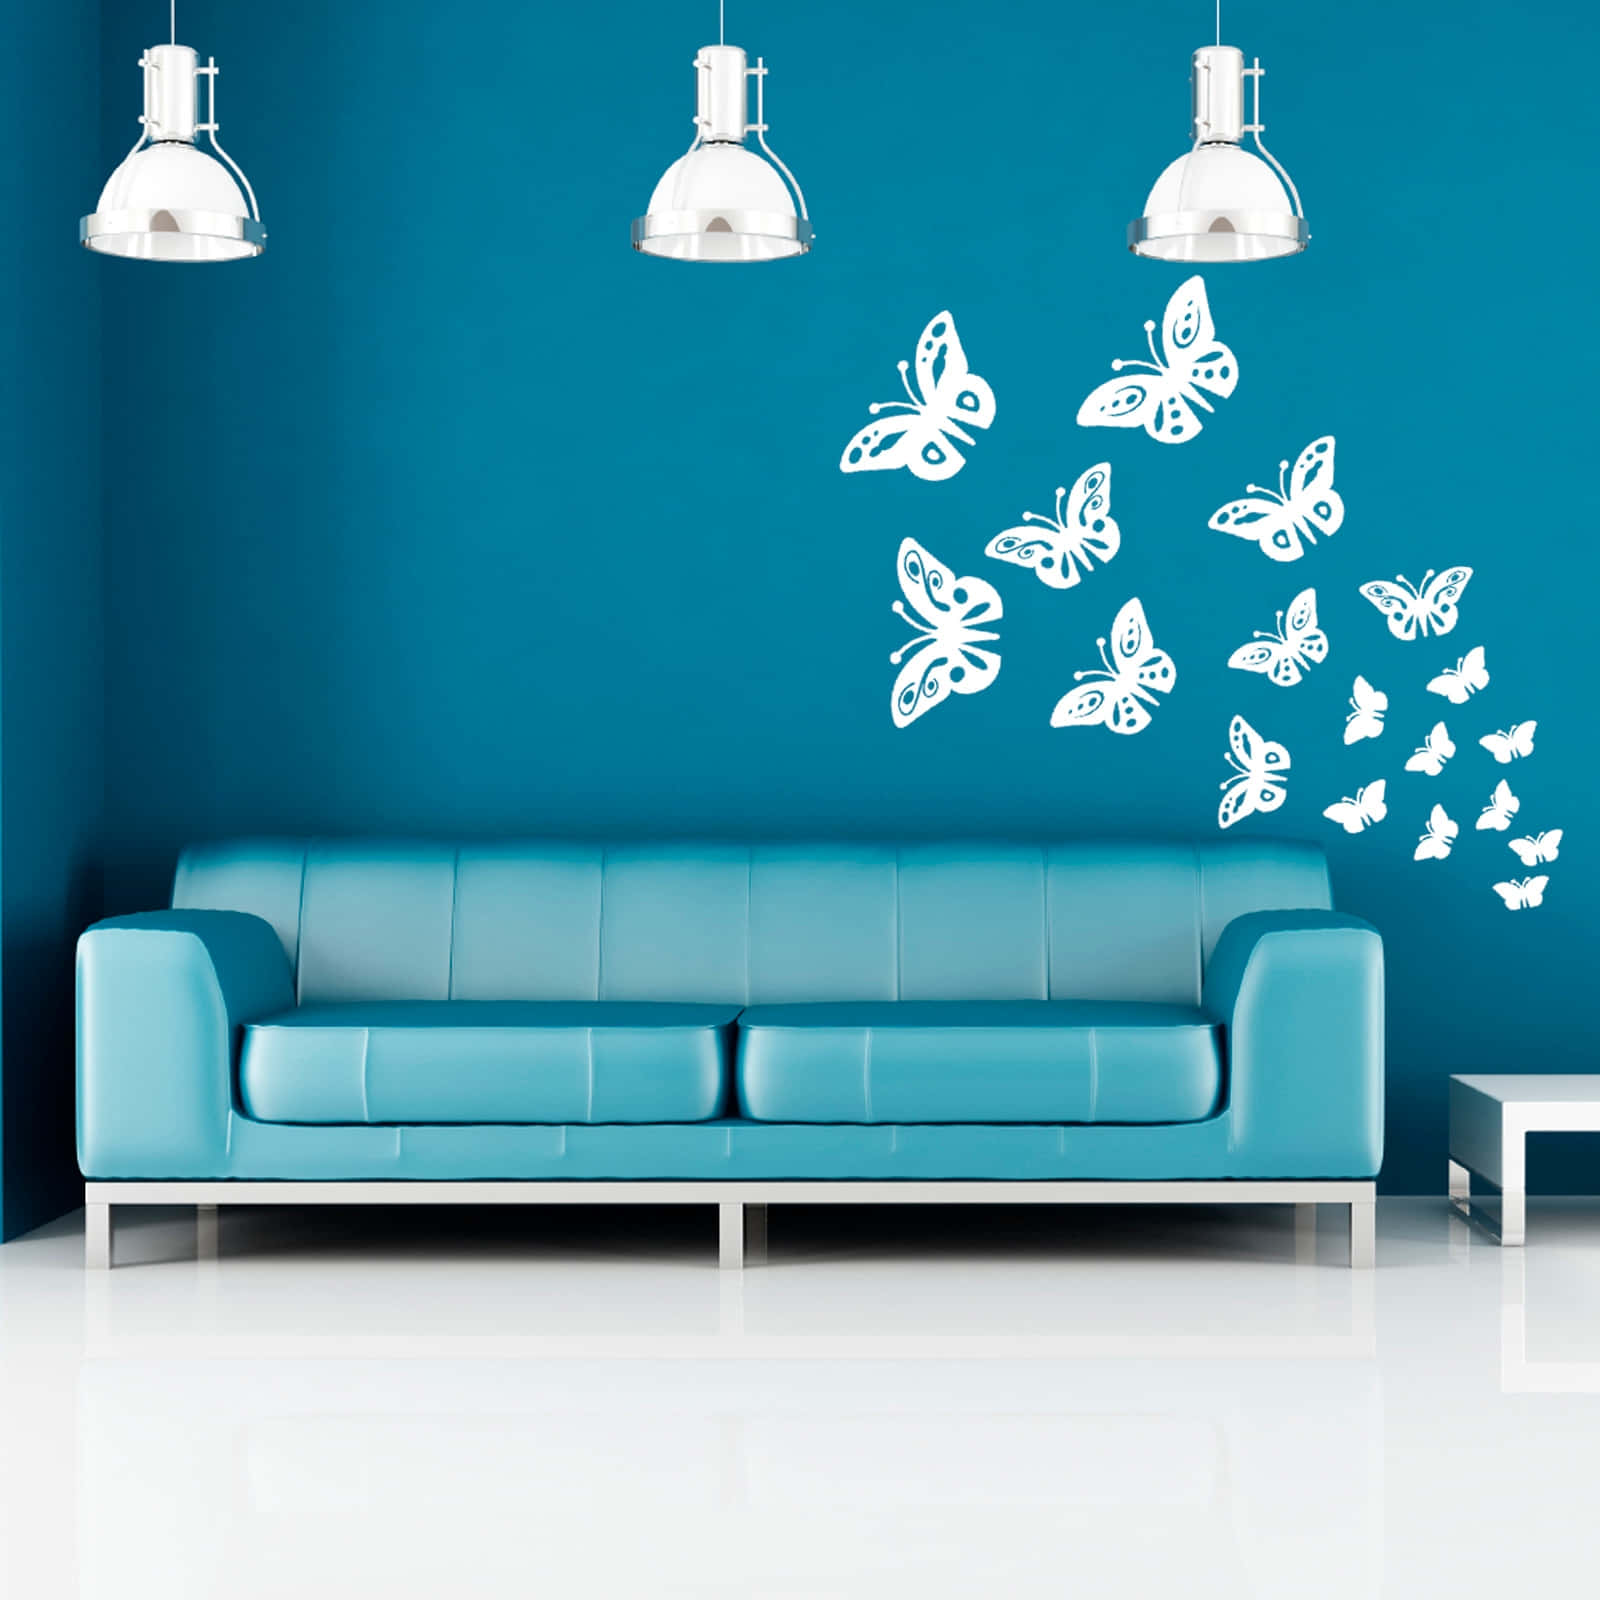 A Blue Couch And White Butterflies On The Wall